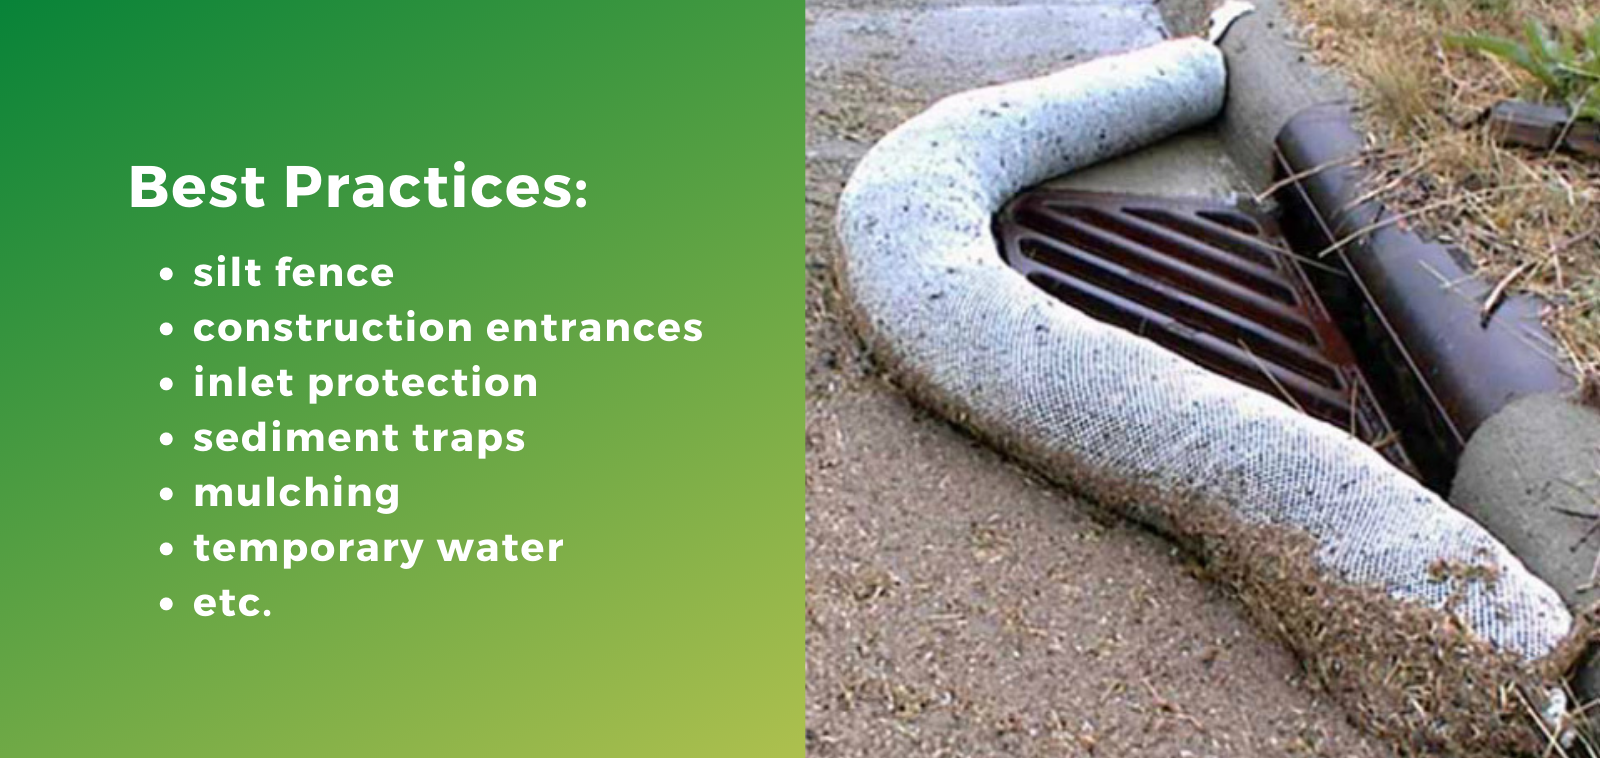 Best practices for erosion and sedimentation control LEED construction prerequisite